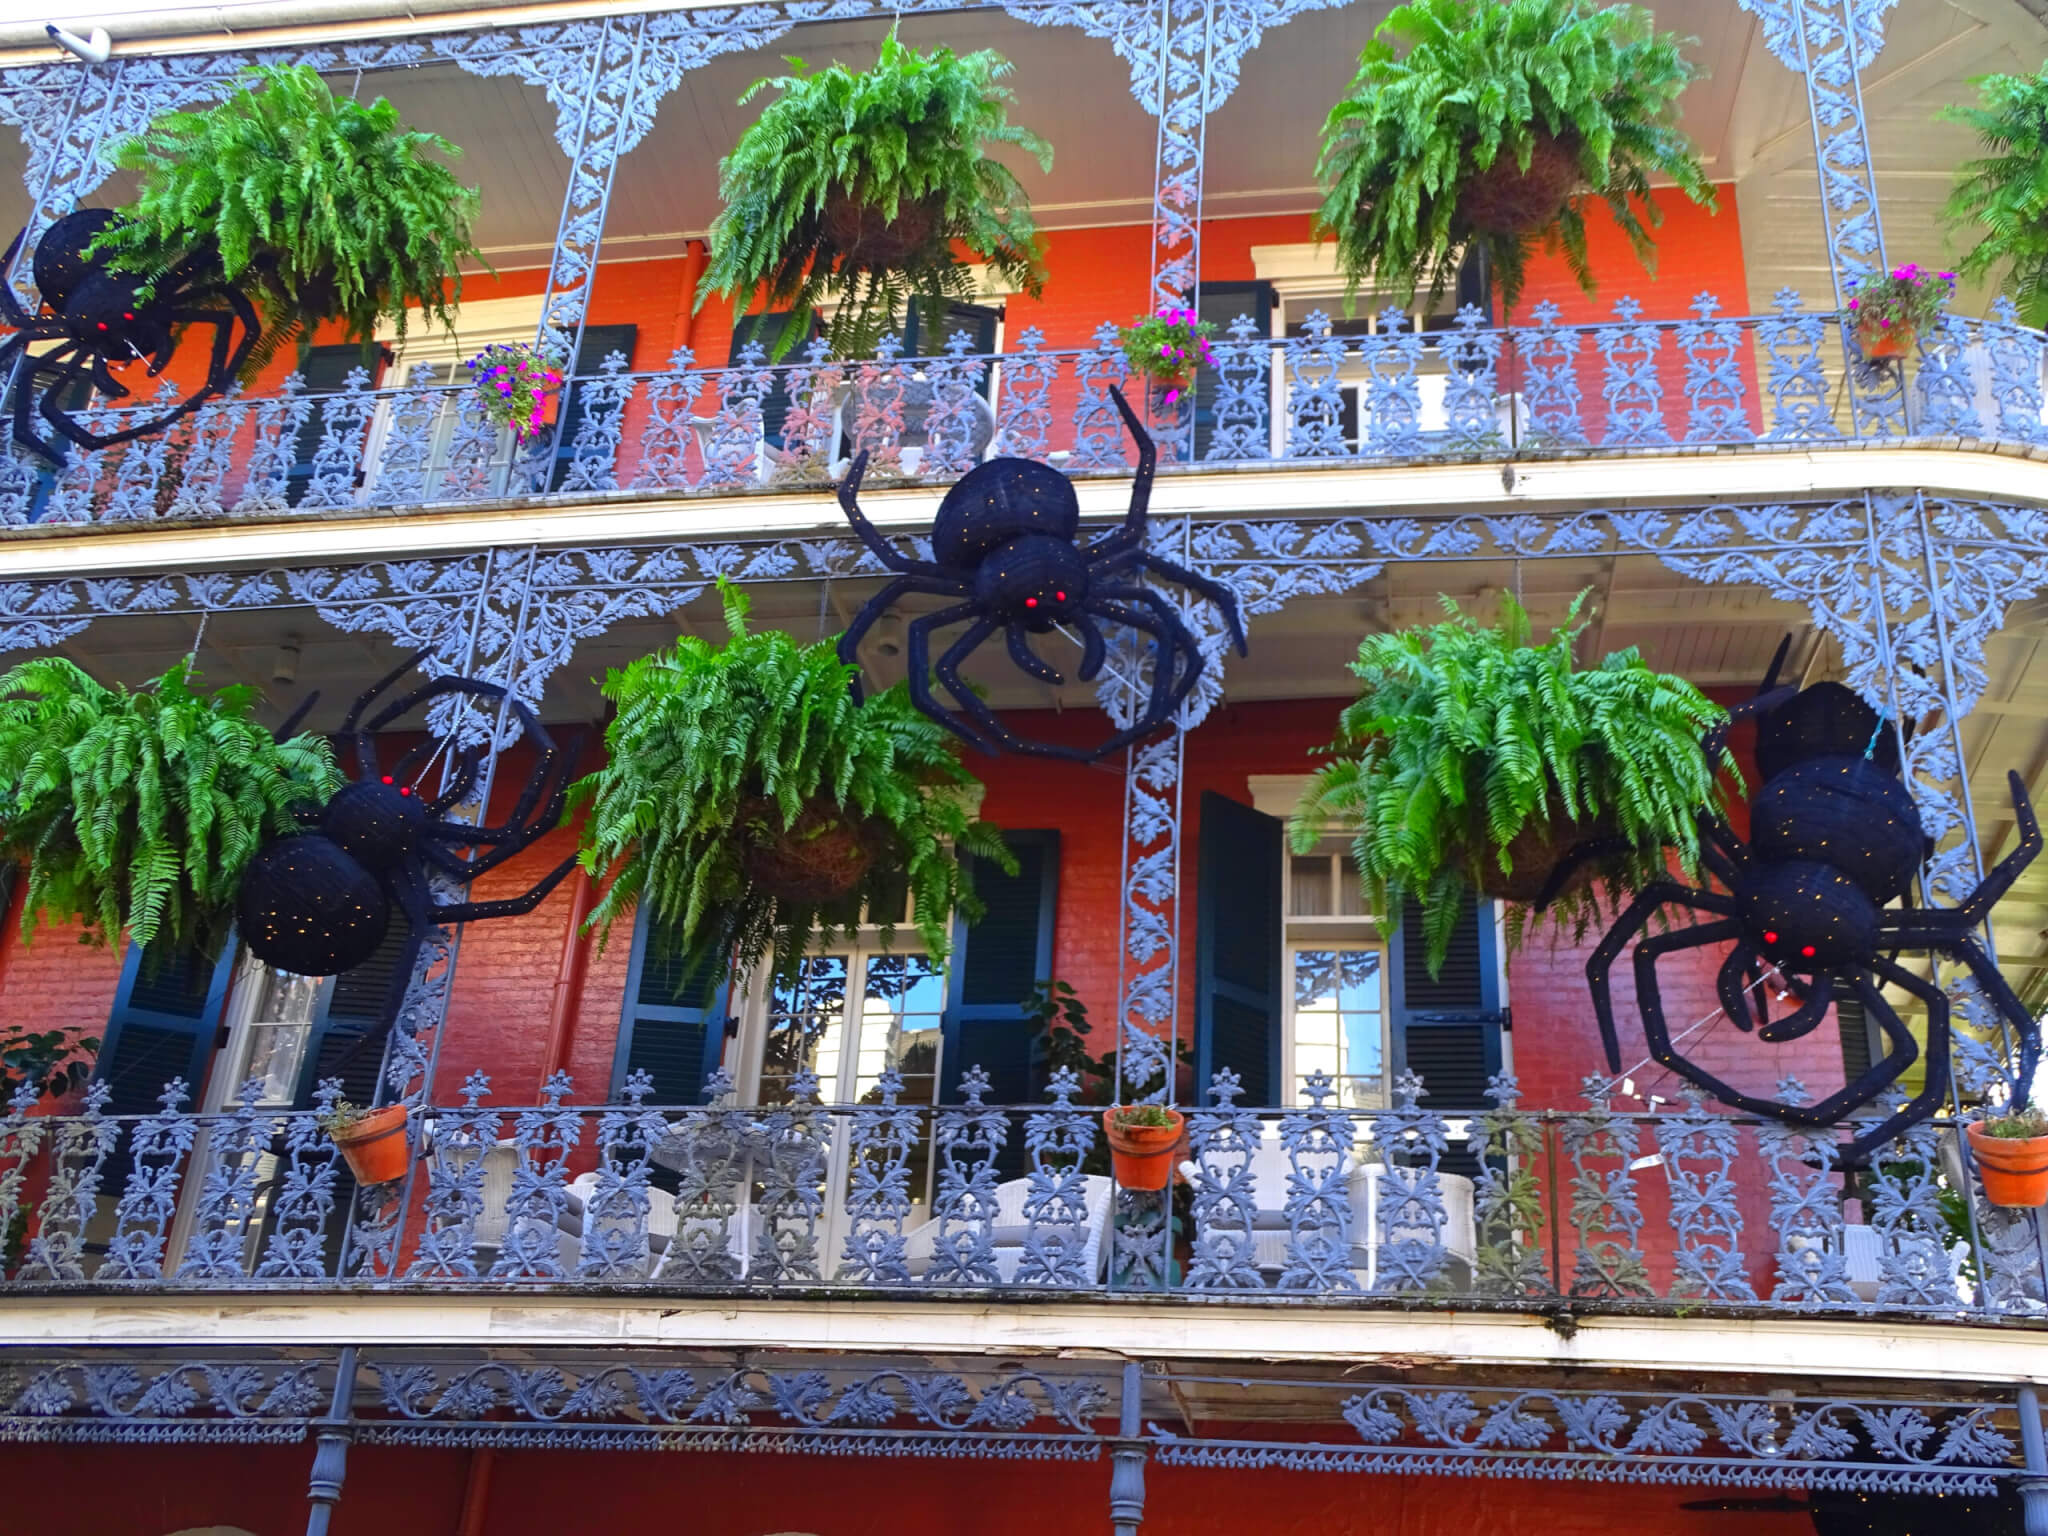 New Orleans decorated for Halloween